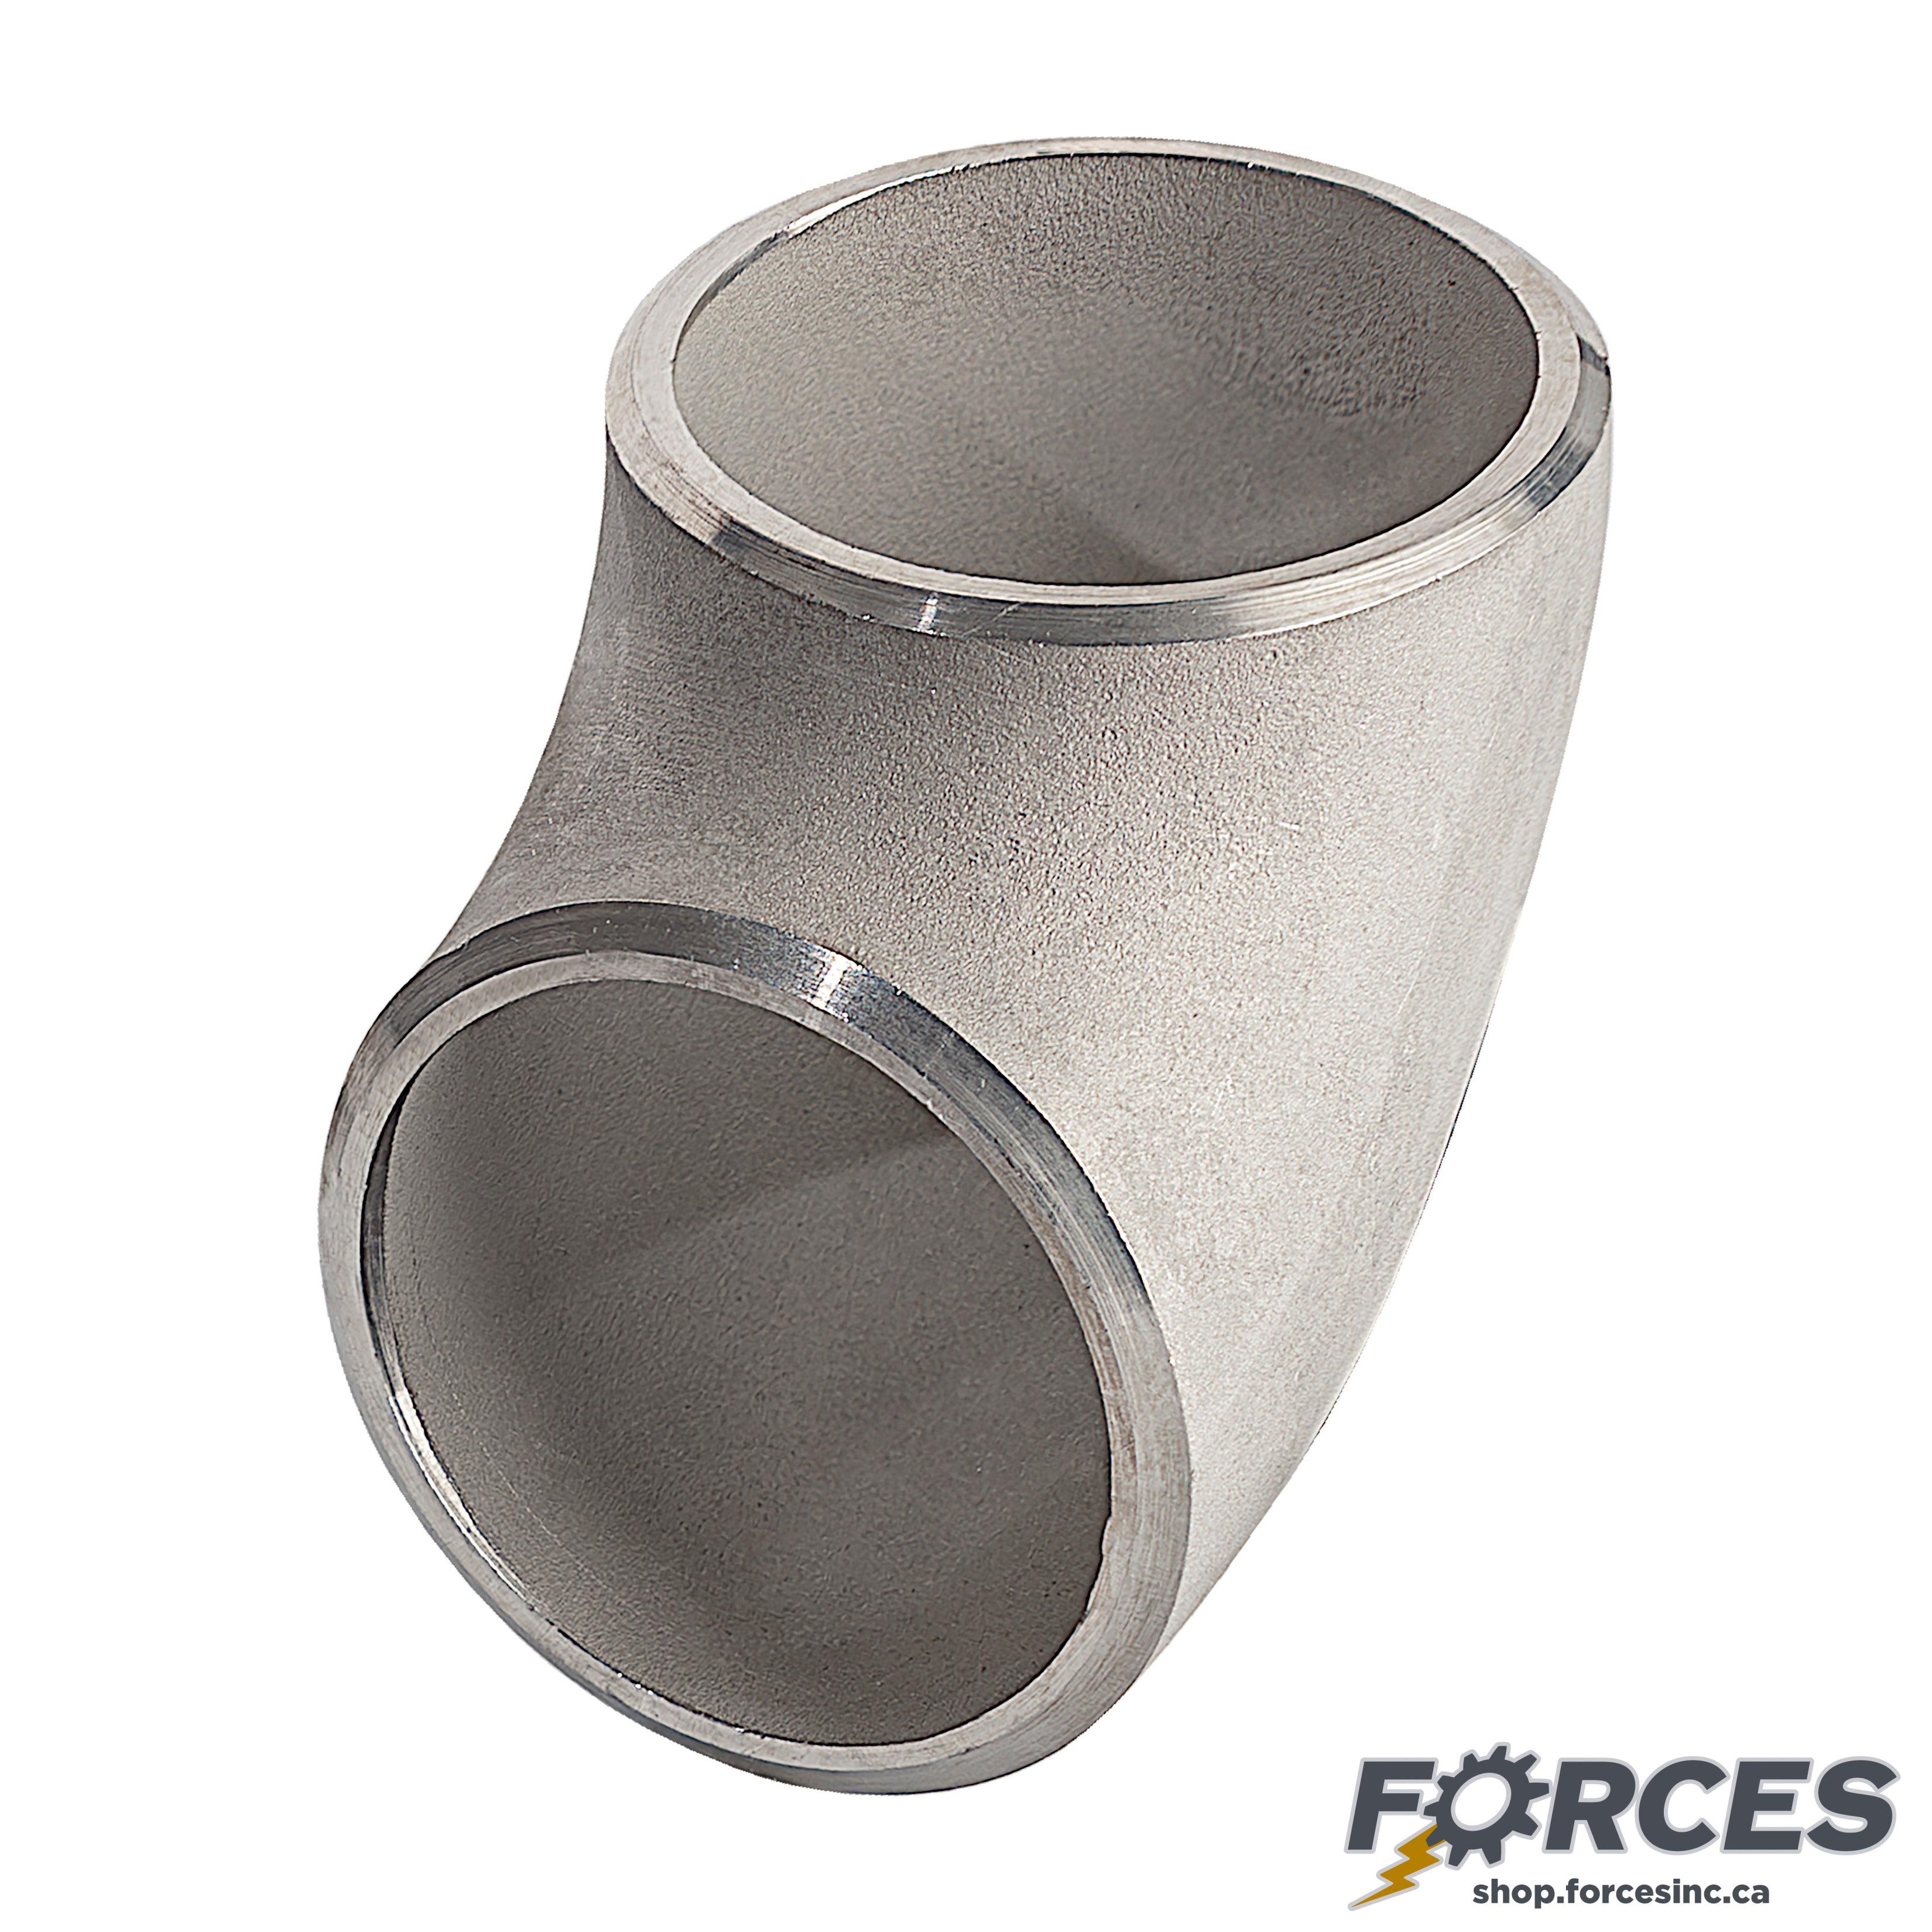 1/2" Elbow 45° SCH 40 Butt Weld - Stainless Steel 304 - Forces Inc